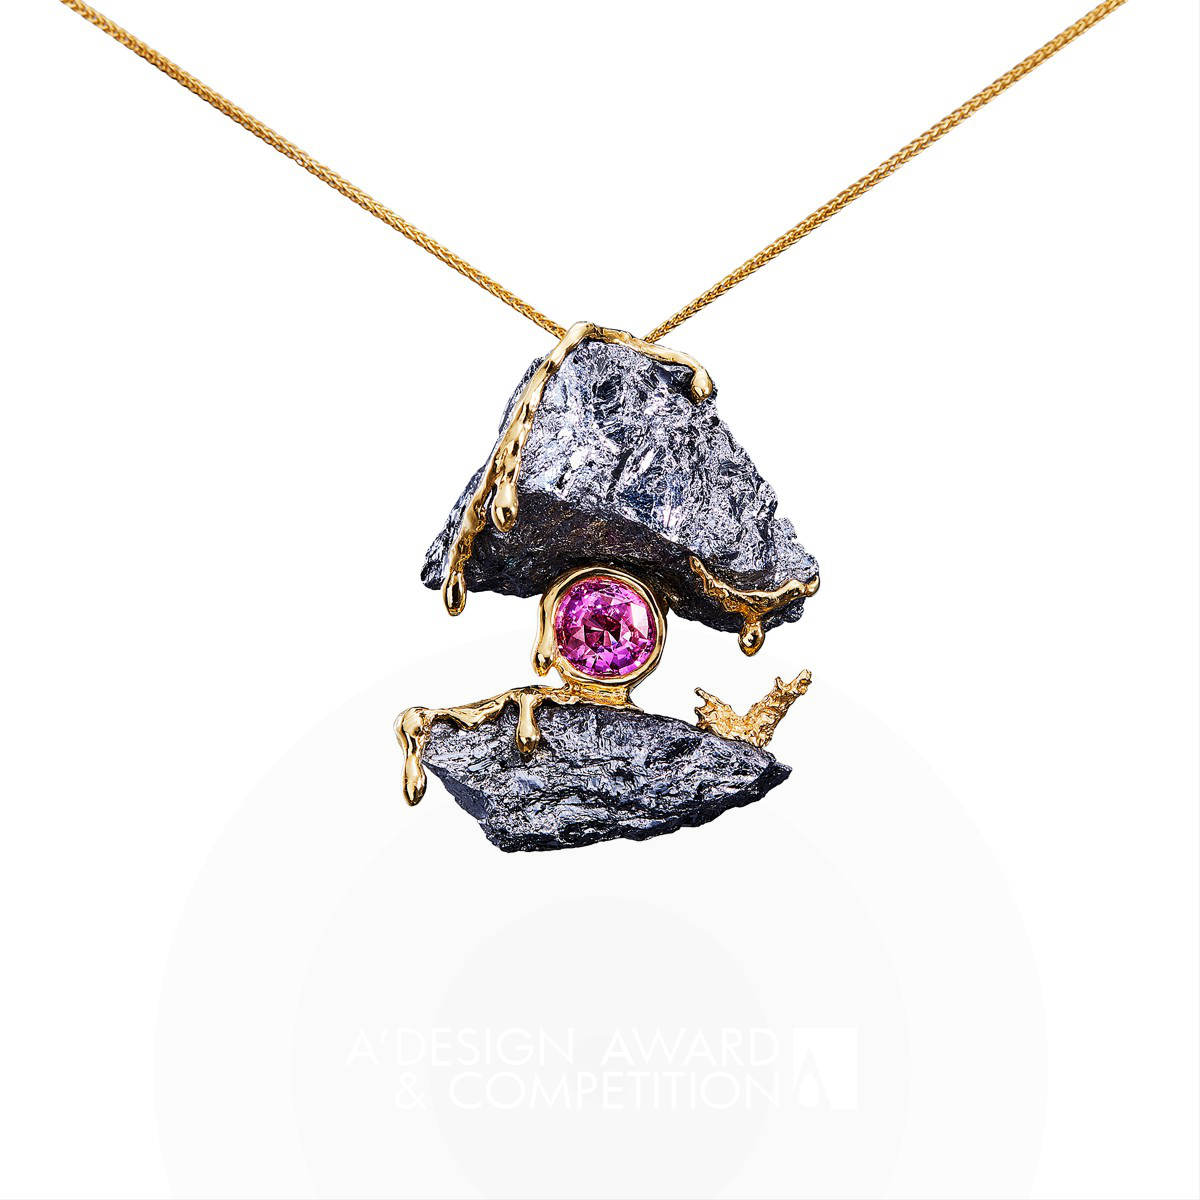 Paloma Sanchez wins Silver at the prestigious A' Jewelry Design Award with Core Necklace.